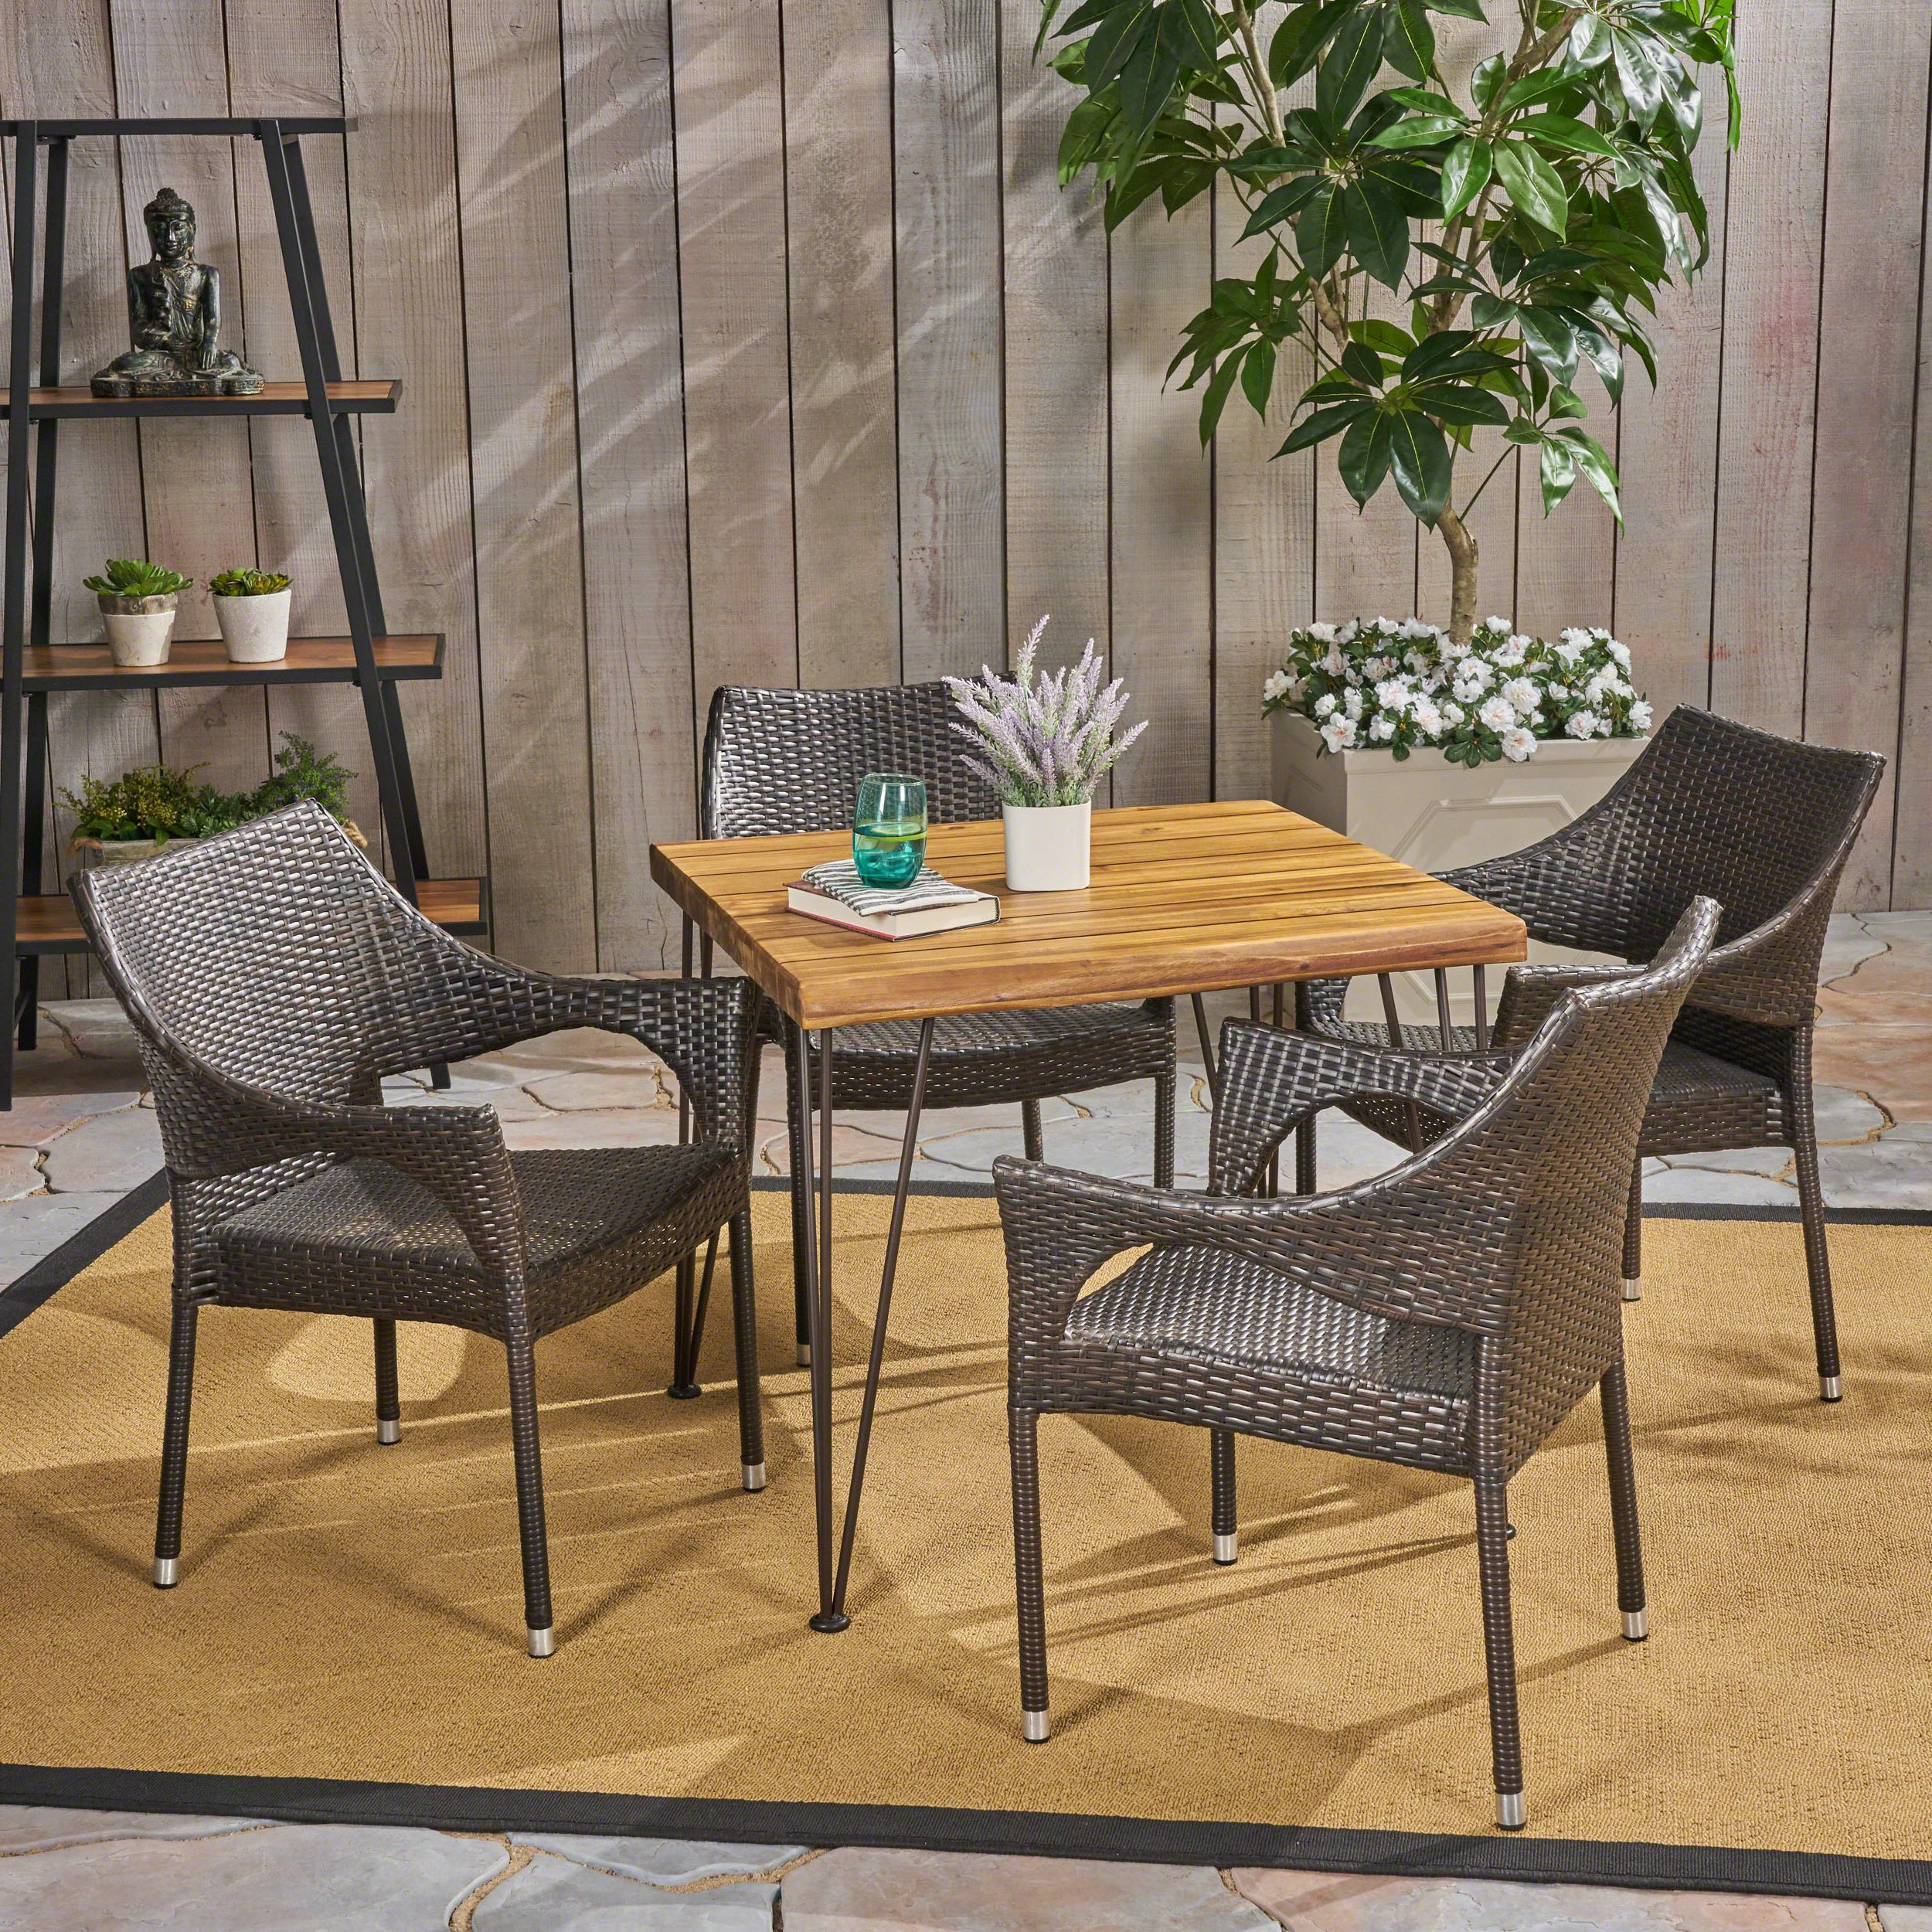 Teak Wicker Outdoor Dining Sets For 2020 Arya Outdoor 5 Piece Industrial Wood And Wicker Square Dining Set (View 3 of 15)